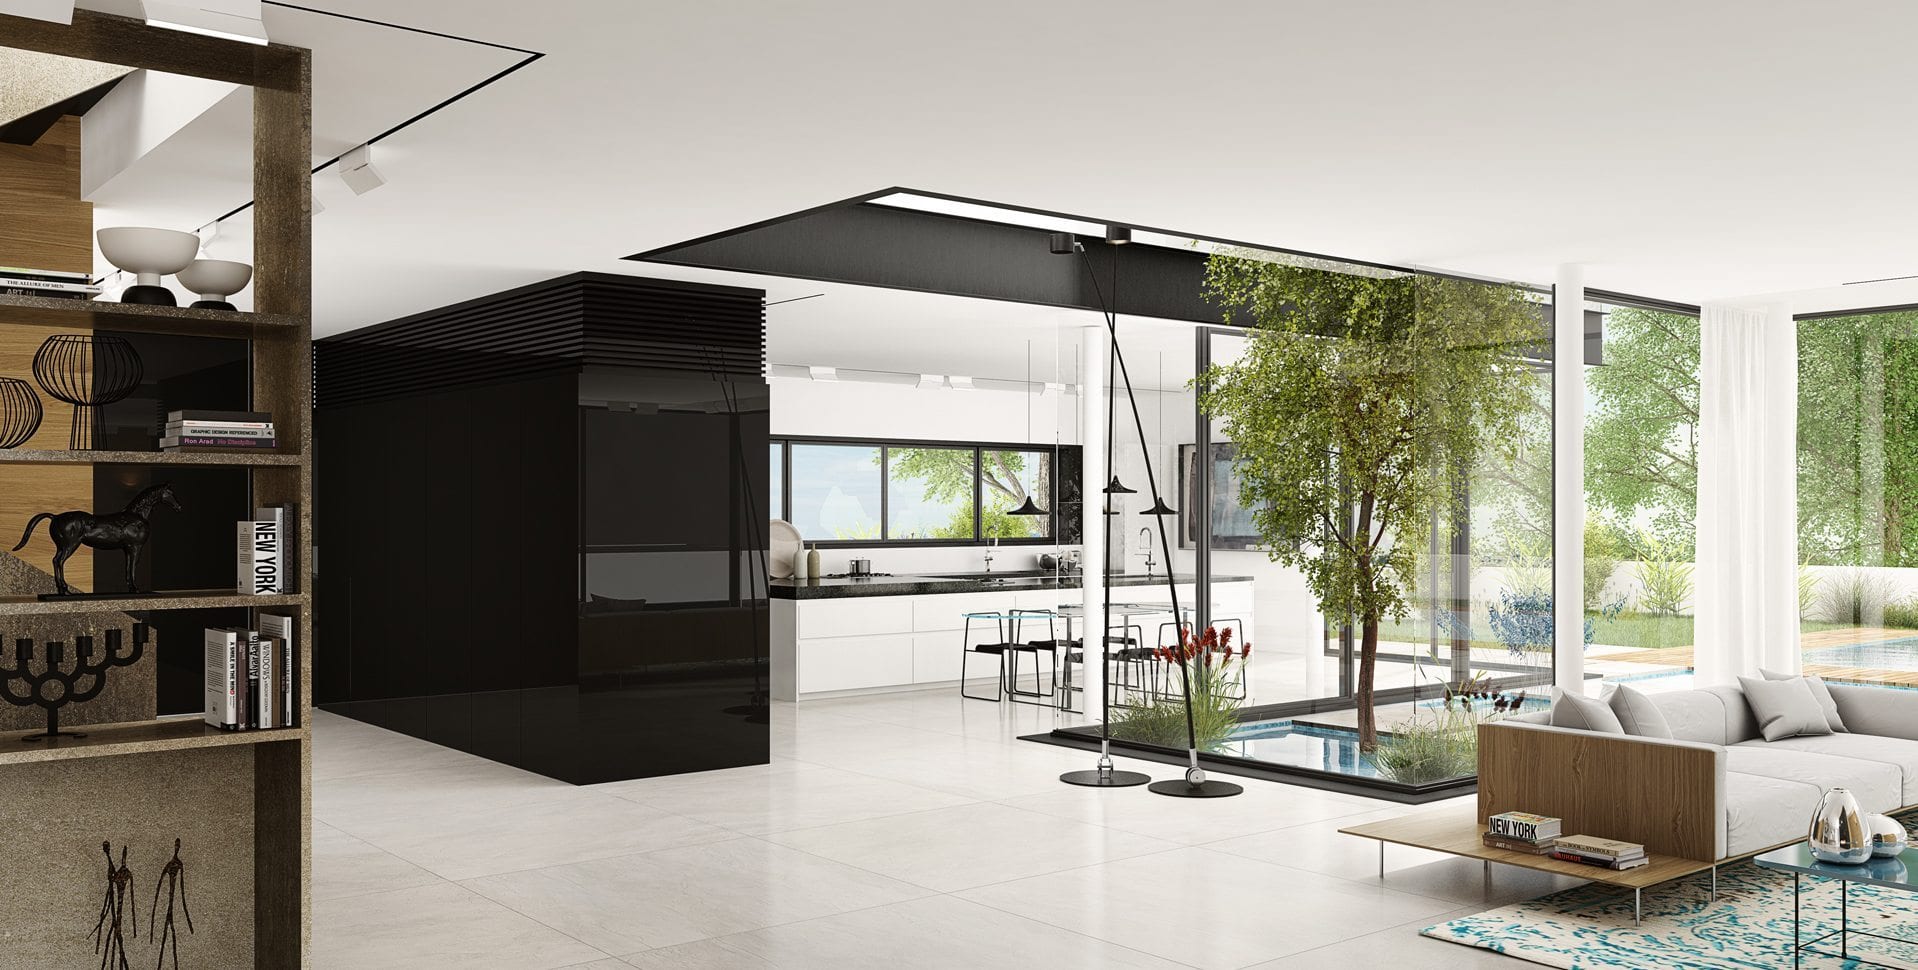 Maayan-Golan_Architectural-Visualization_interior-visualization_kitchen_private-residence_architect-yulie-wollman_black-and-white-project_back-elevation_01